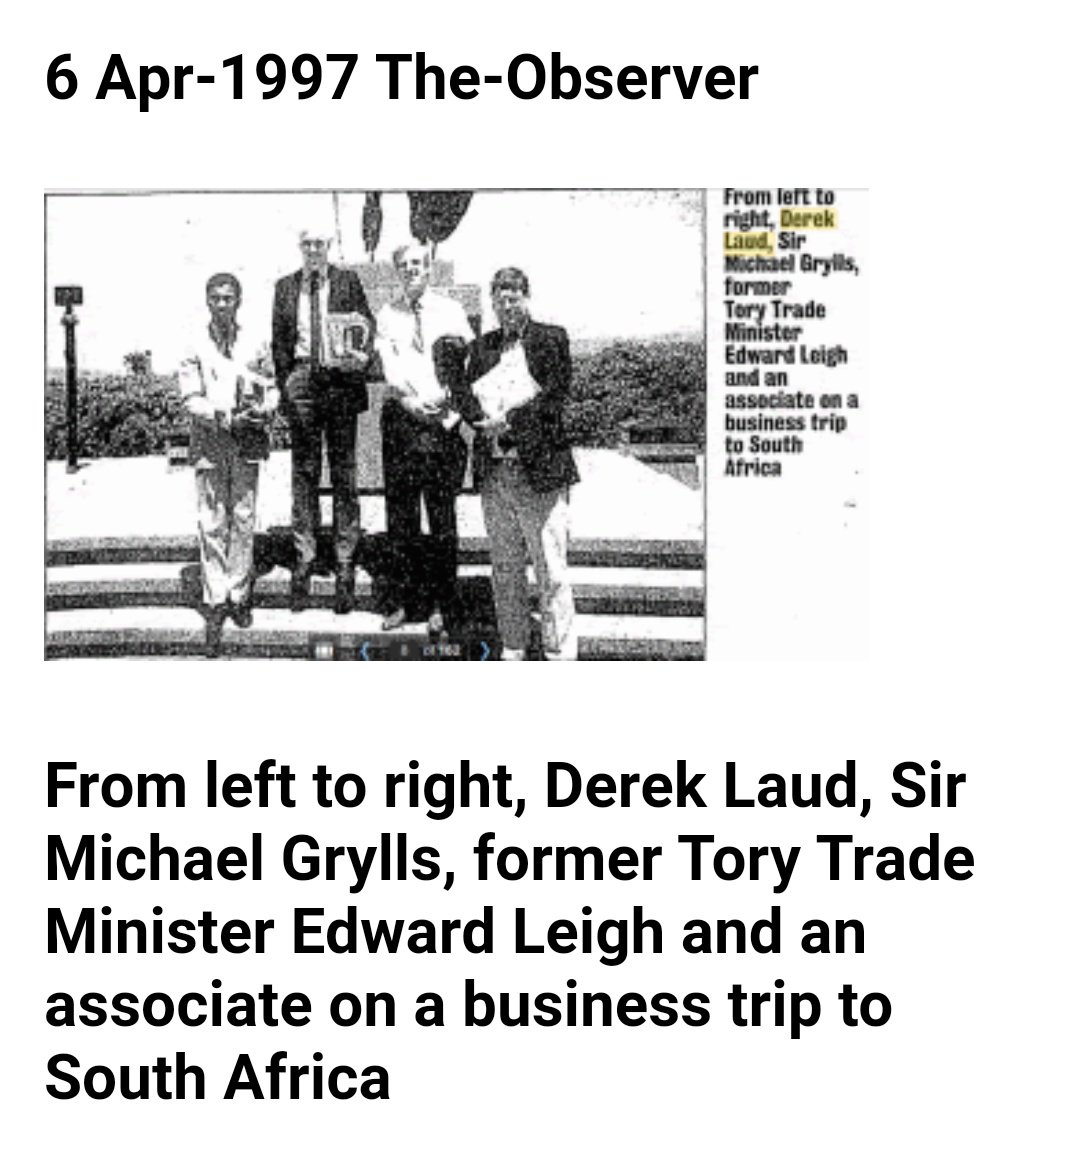 Rupert Tate is CEO at Bear Grylls Ventures. Bear, adventurer, Chief Scout and business associate of Derek Laud, is the son of Michael Grylls MP who, together with Neil Hamilton, was caught up in Cash for Questions. Bear is associated with the Alpha Course.  https://www.independent.co.uk/news/uk/home-news/inside-the-alpha-course-british-christianitys-biggest-success-story-8555160.html